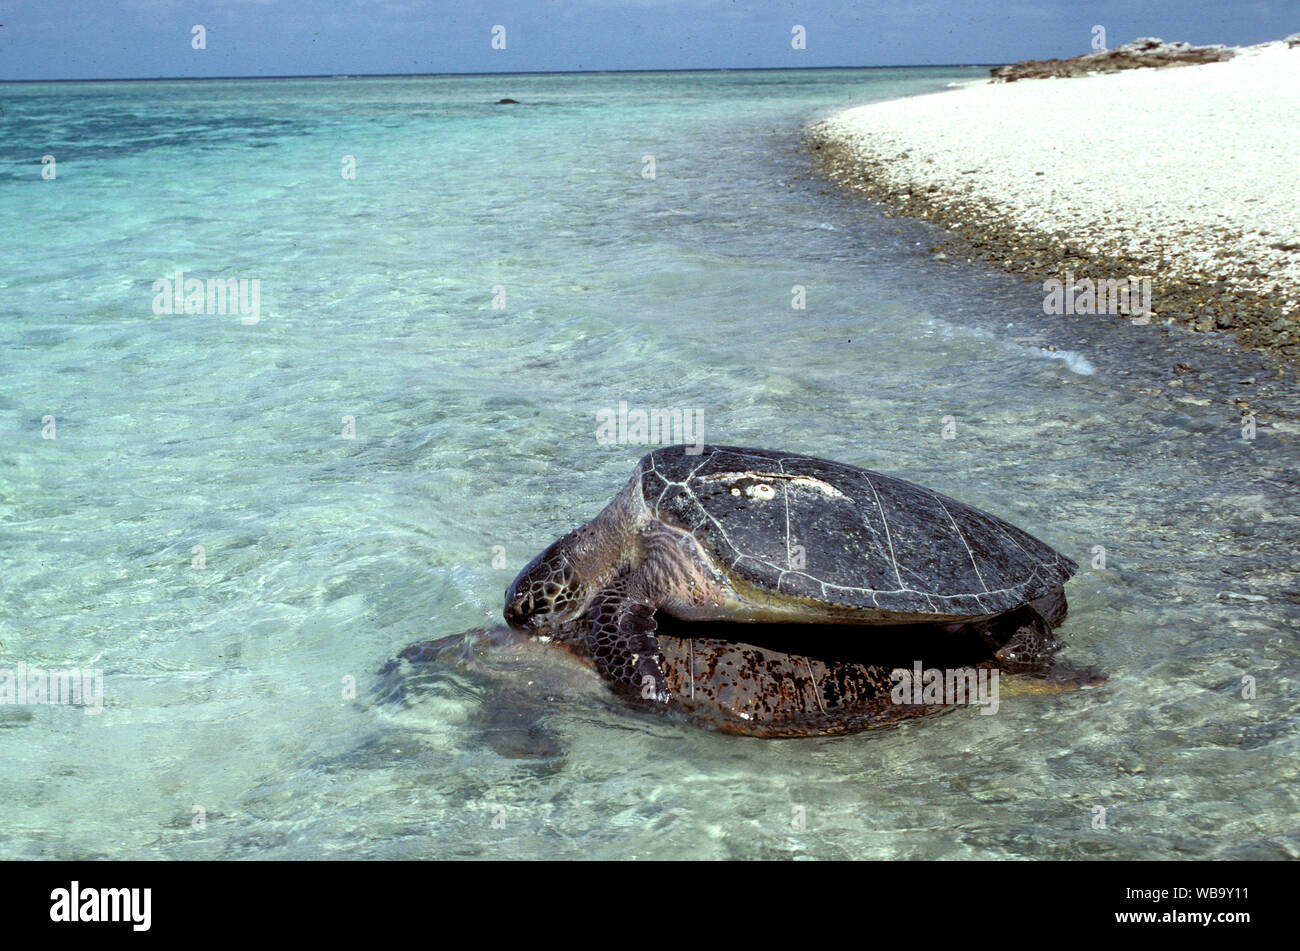 Green turtles (Chelonia mydas), mating. Lady Musgrave Island, Capricornia Cays National Park, Capricorn-Bunker Group, Great Barrier Reef, Queensland, Stock Photo